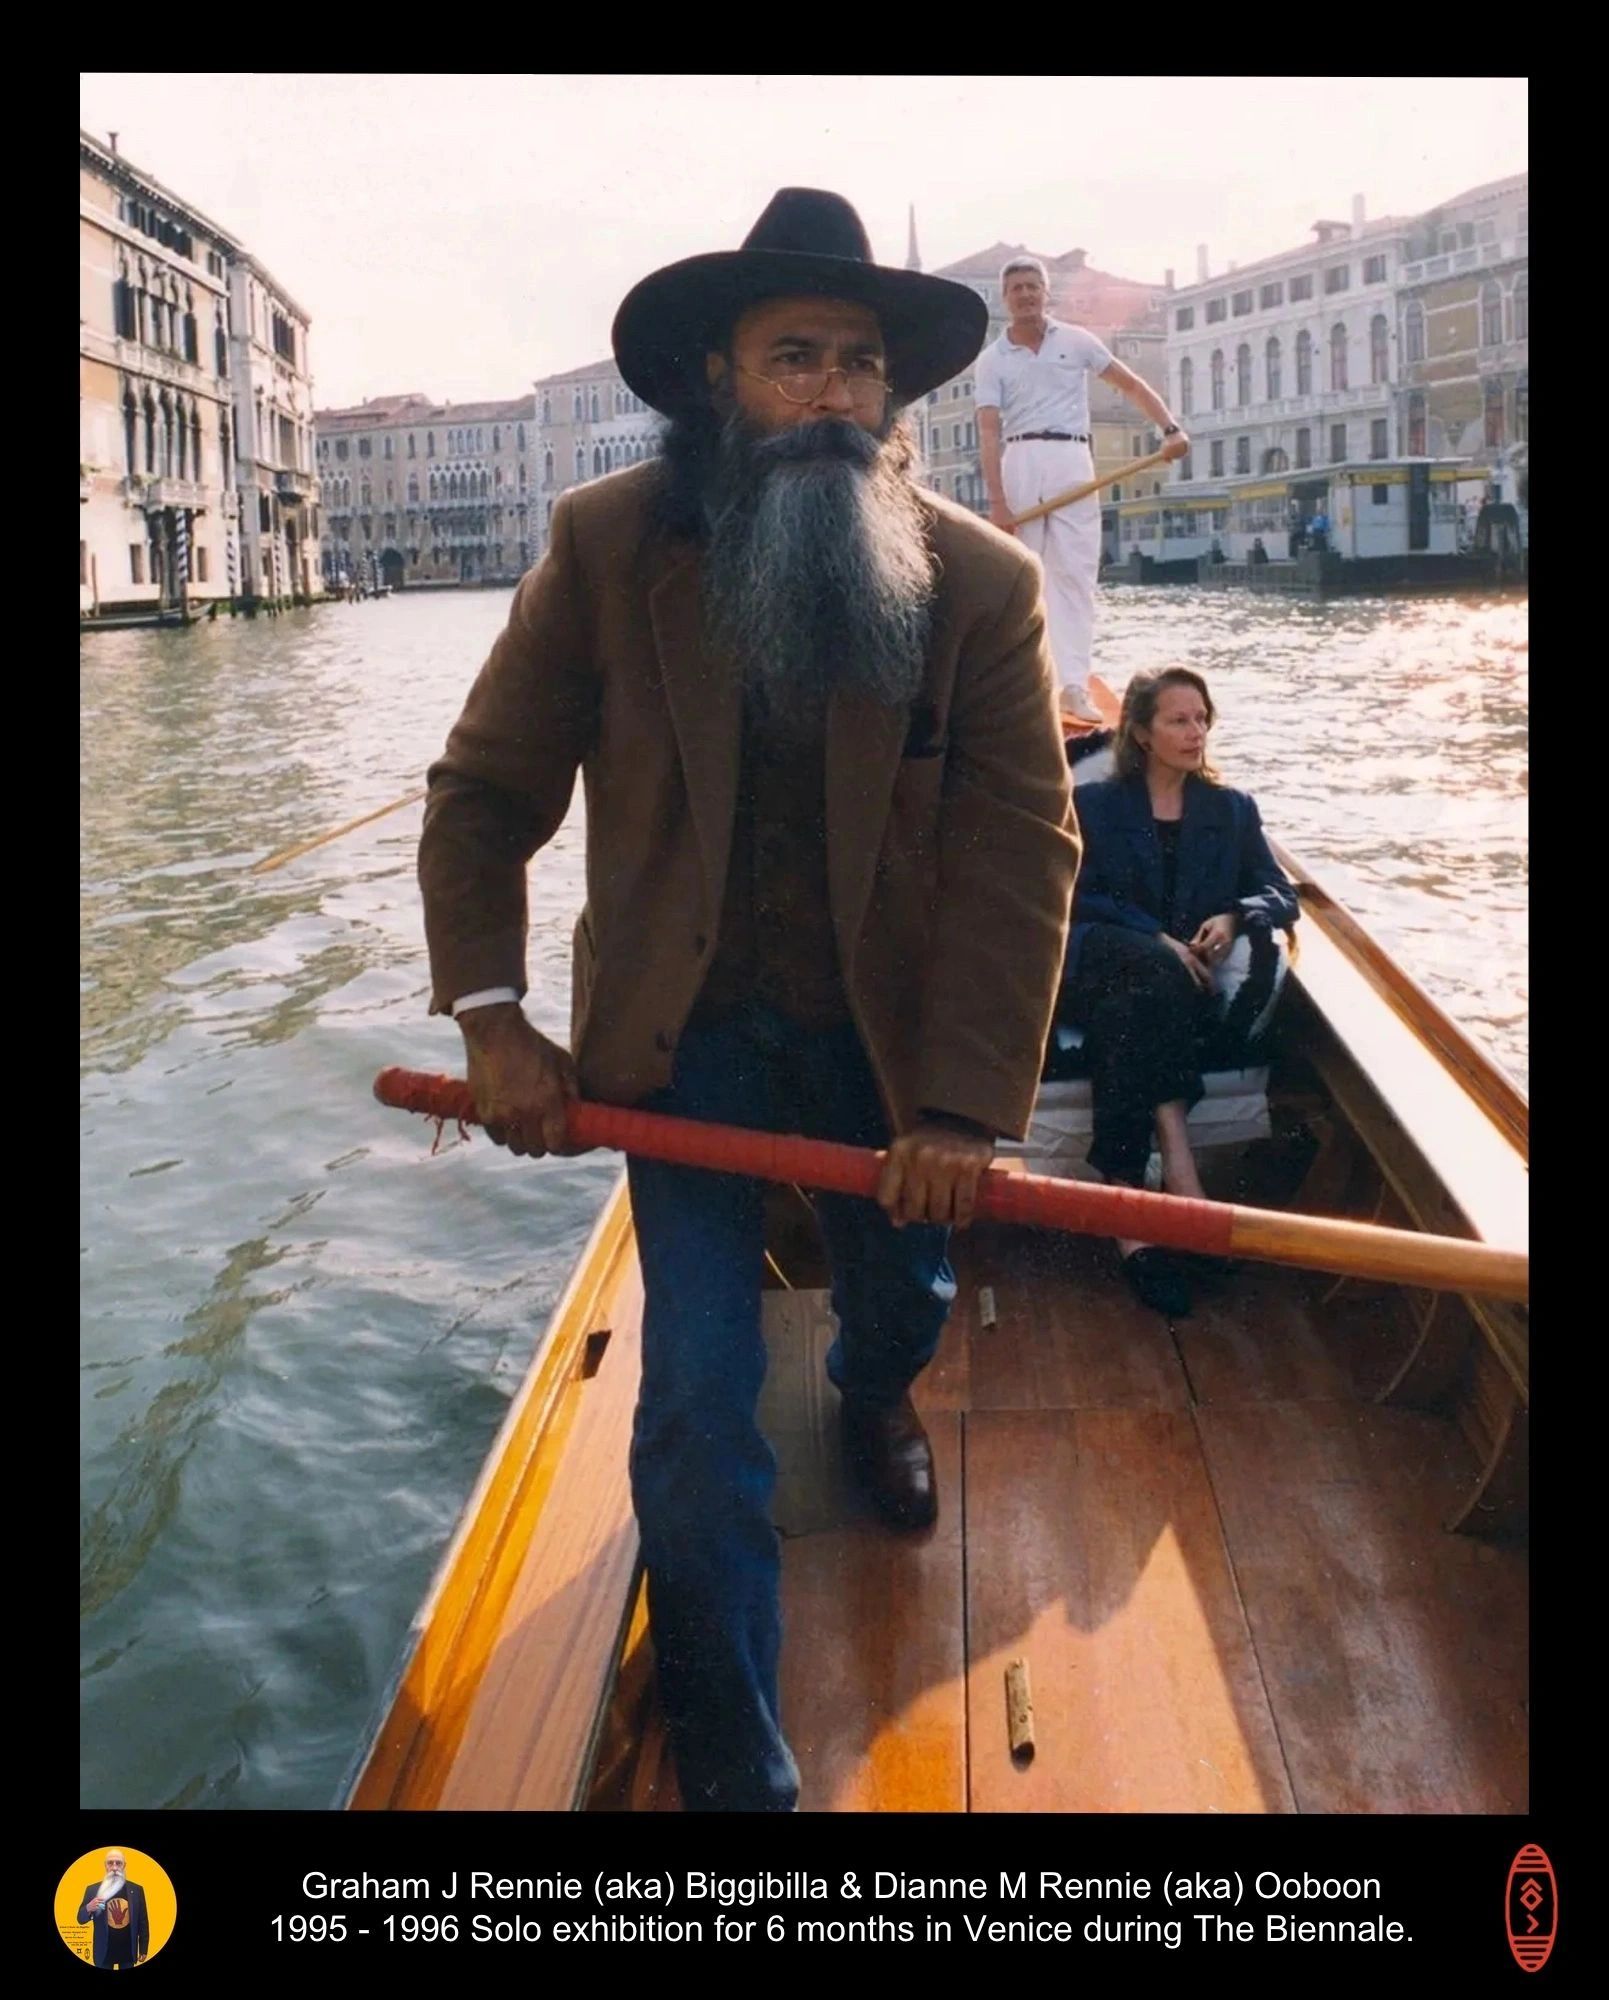  Here we are in Venice during my 1995 - 1996 solo exhibition for 6 months during "The Biennale".